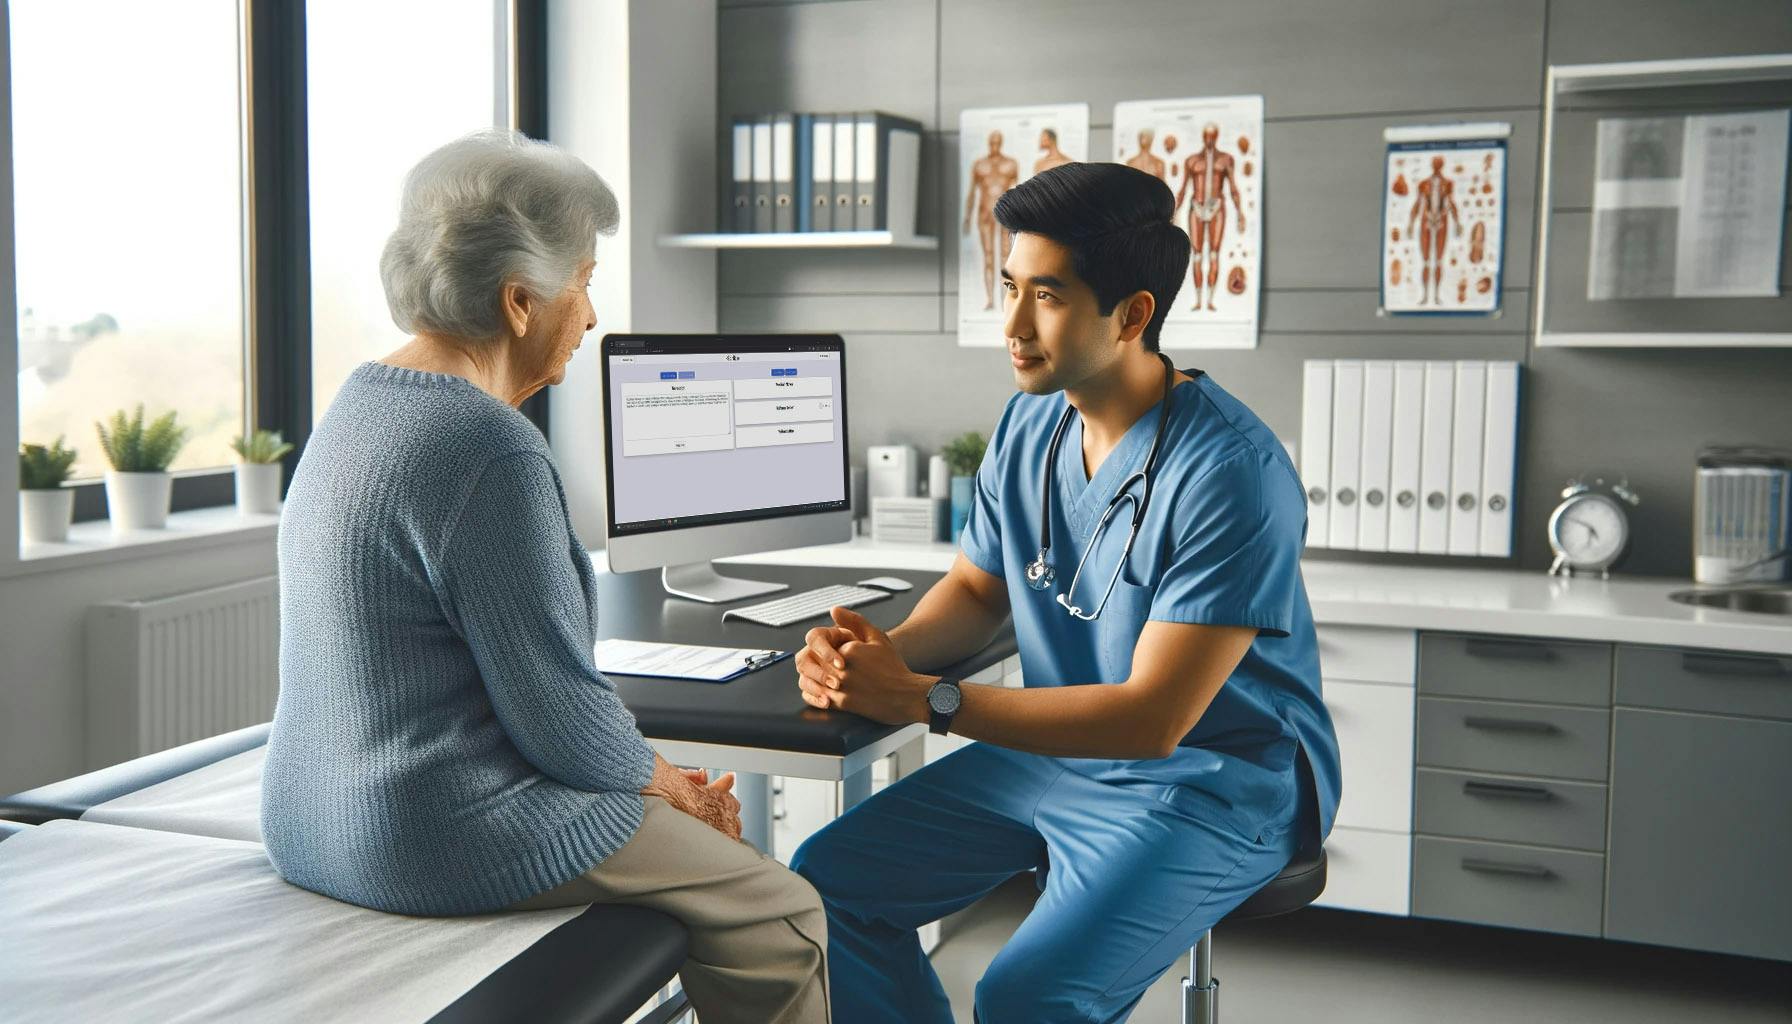 An illustration of a doctor talking to a patient